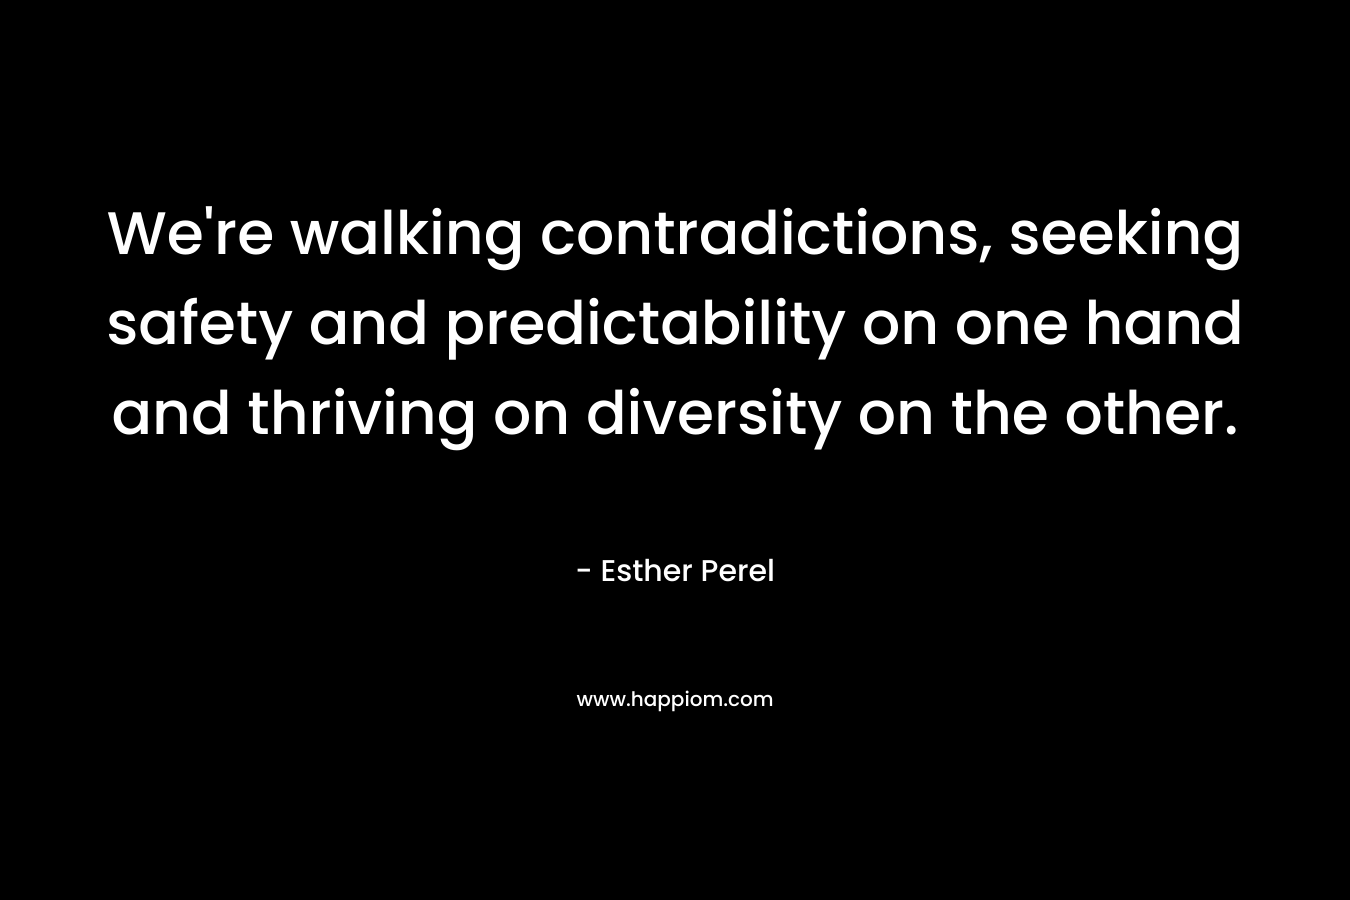 We’re walking contradictions, seeking safety and predictability on one hand and thriving on diversity on the other. – Esther Perel